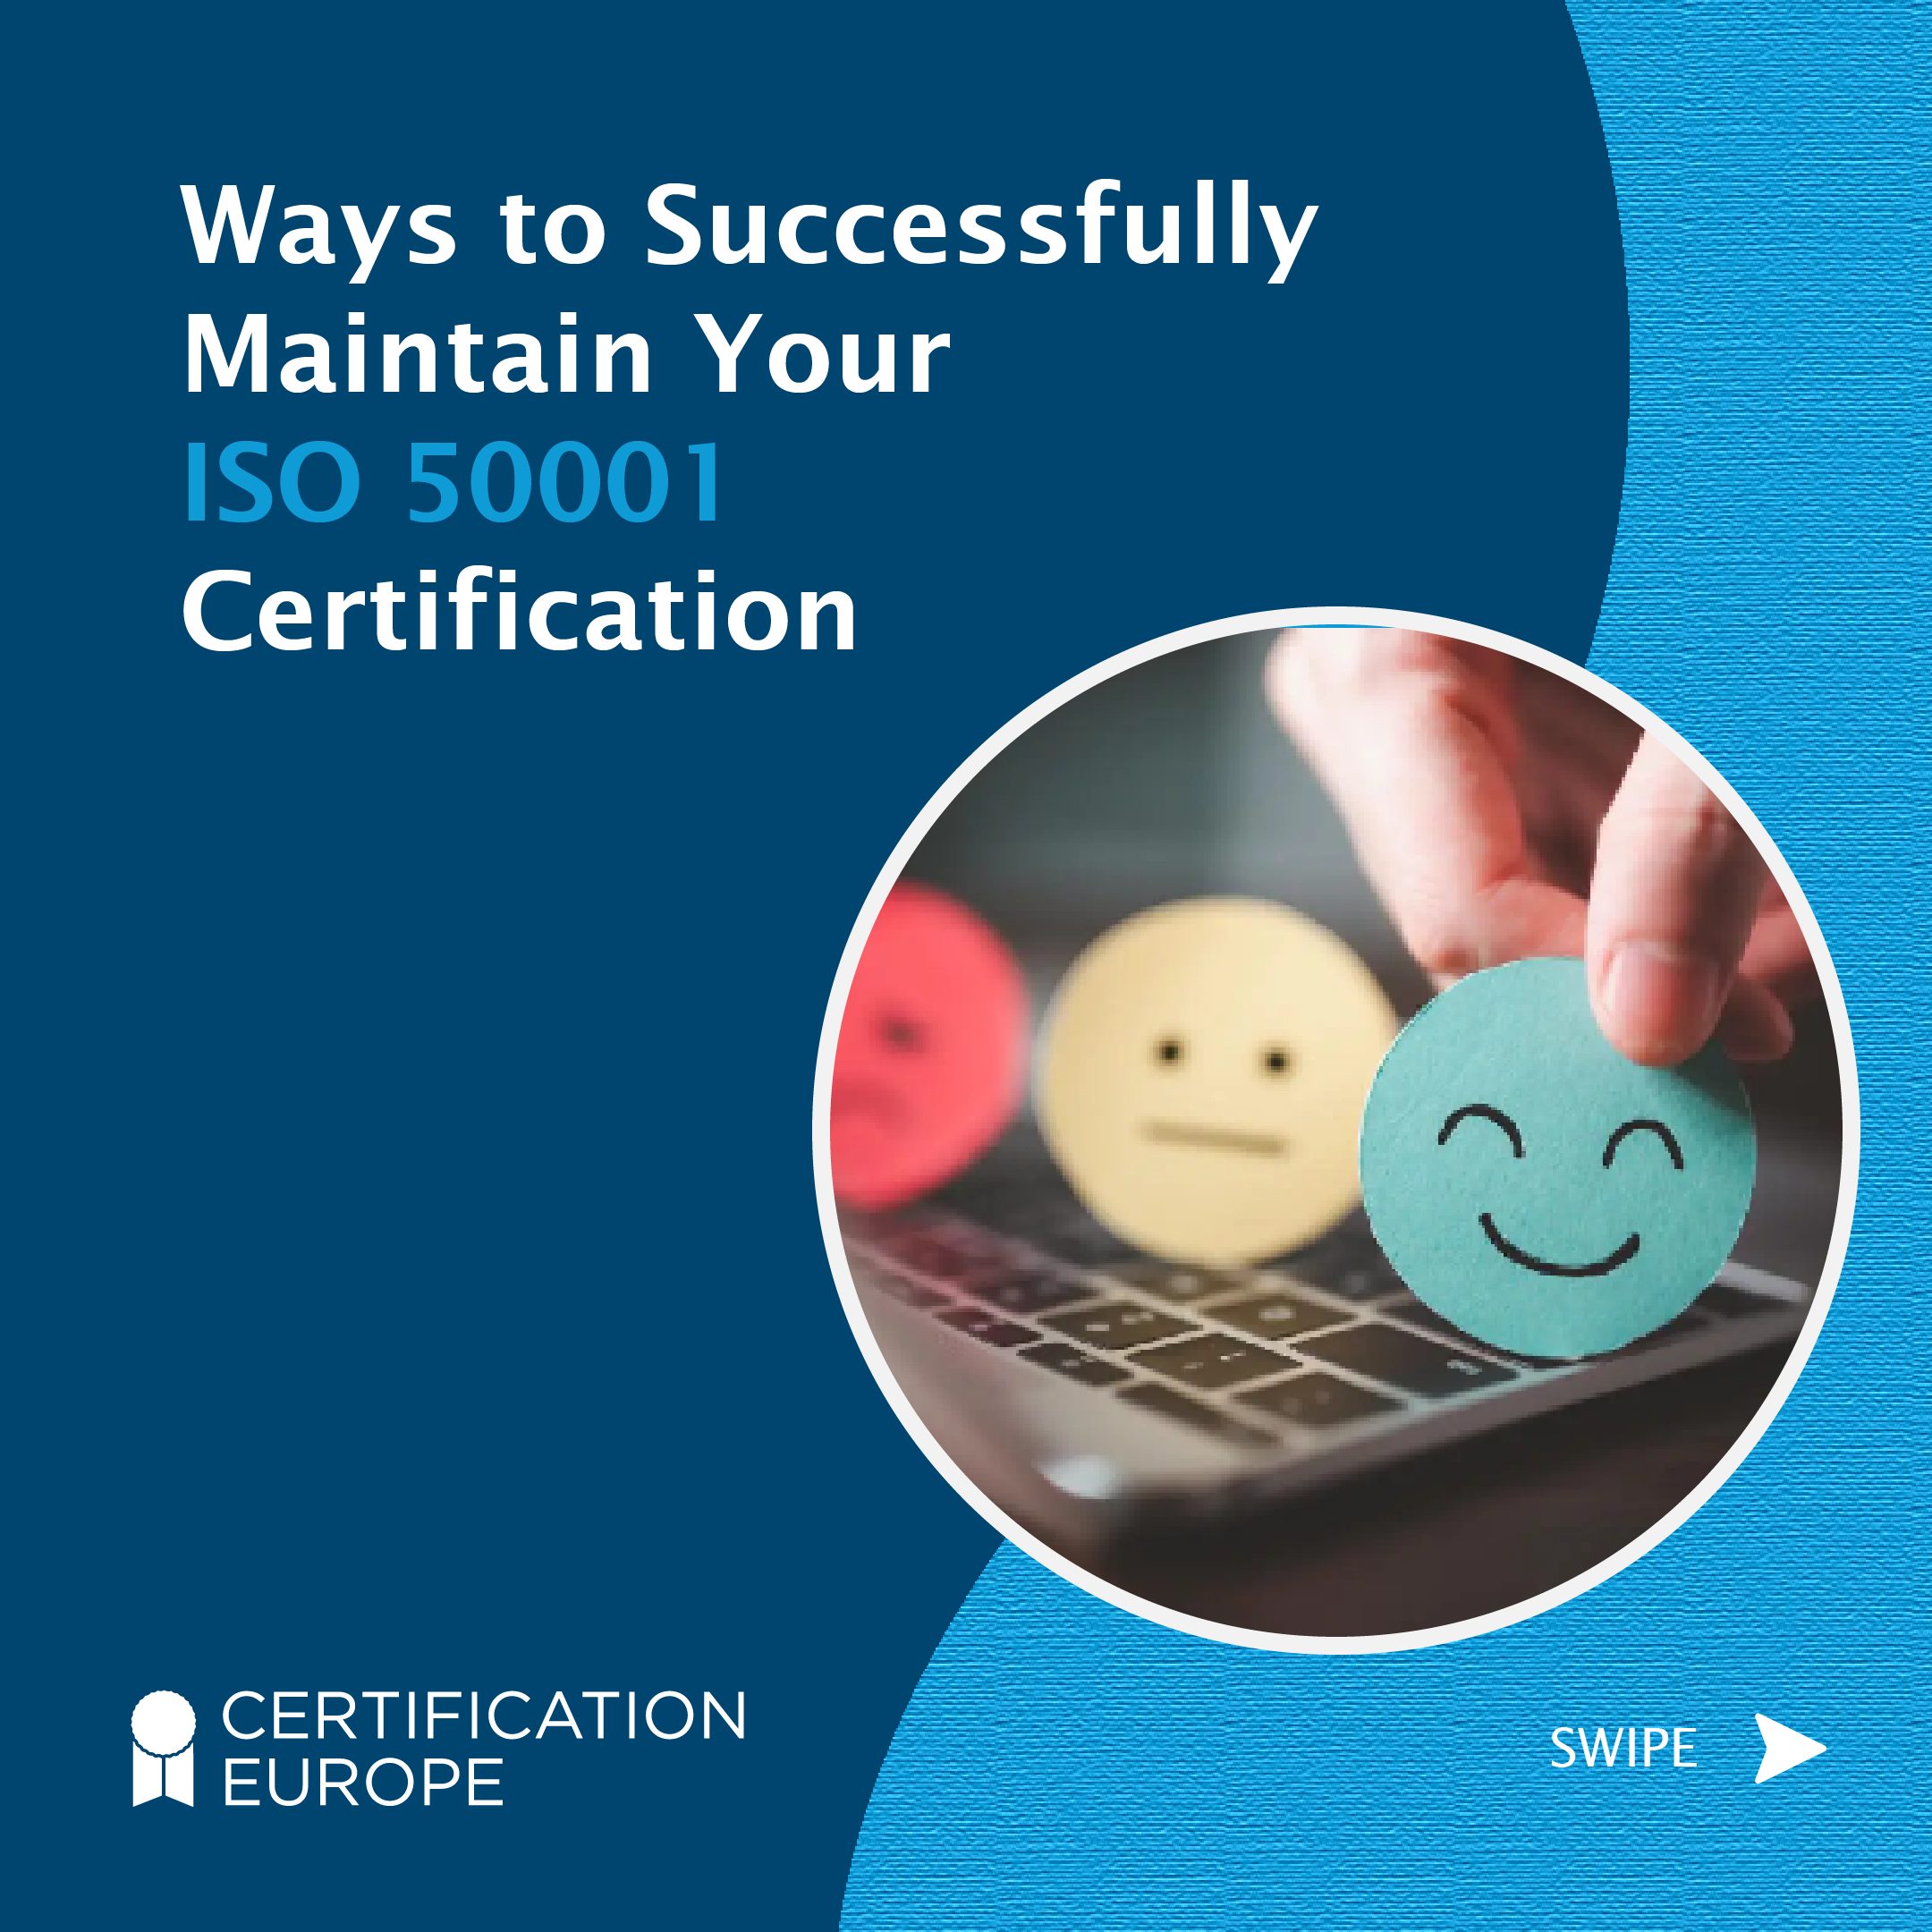 Ways to successfully maintain your ISO 50001 Certification